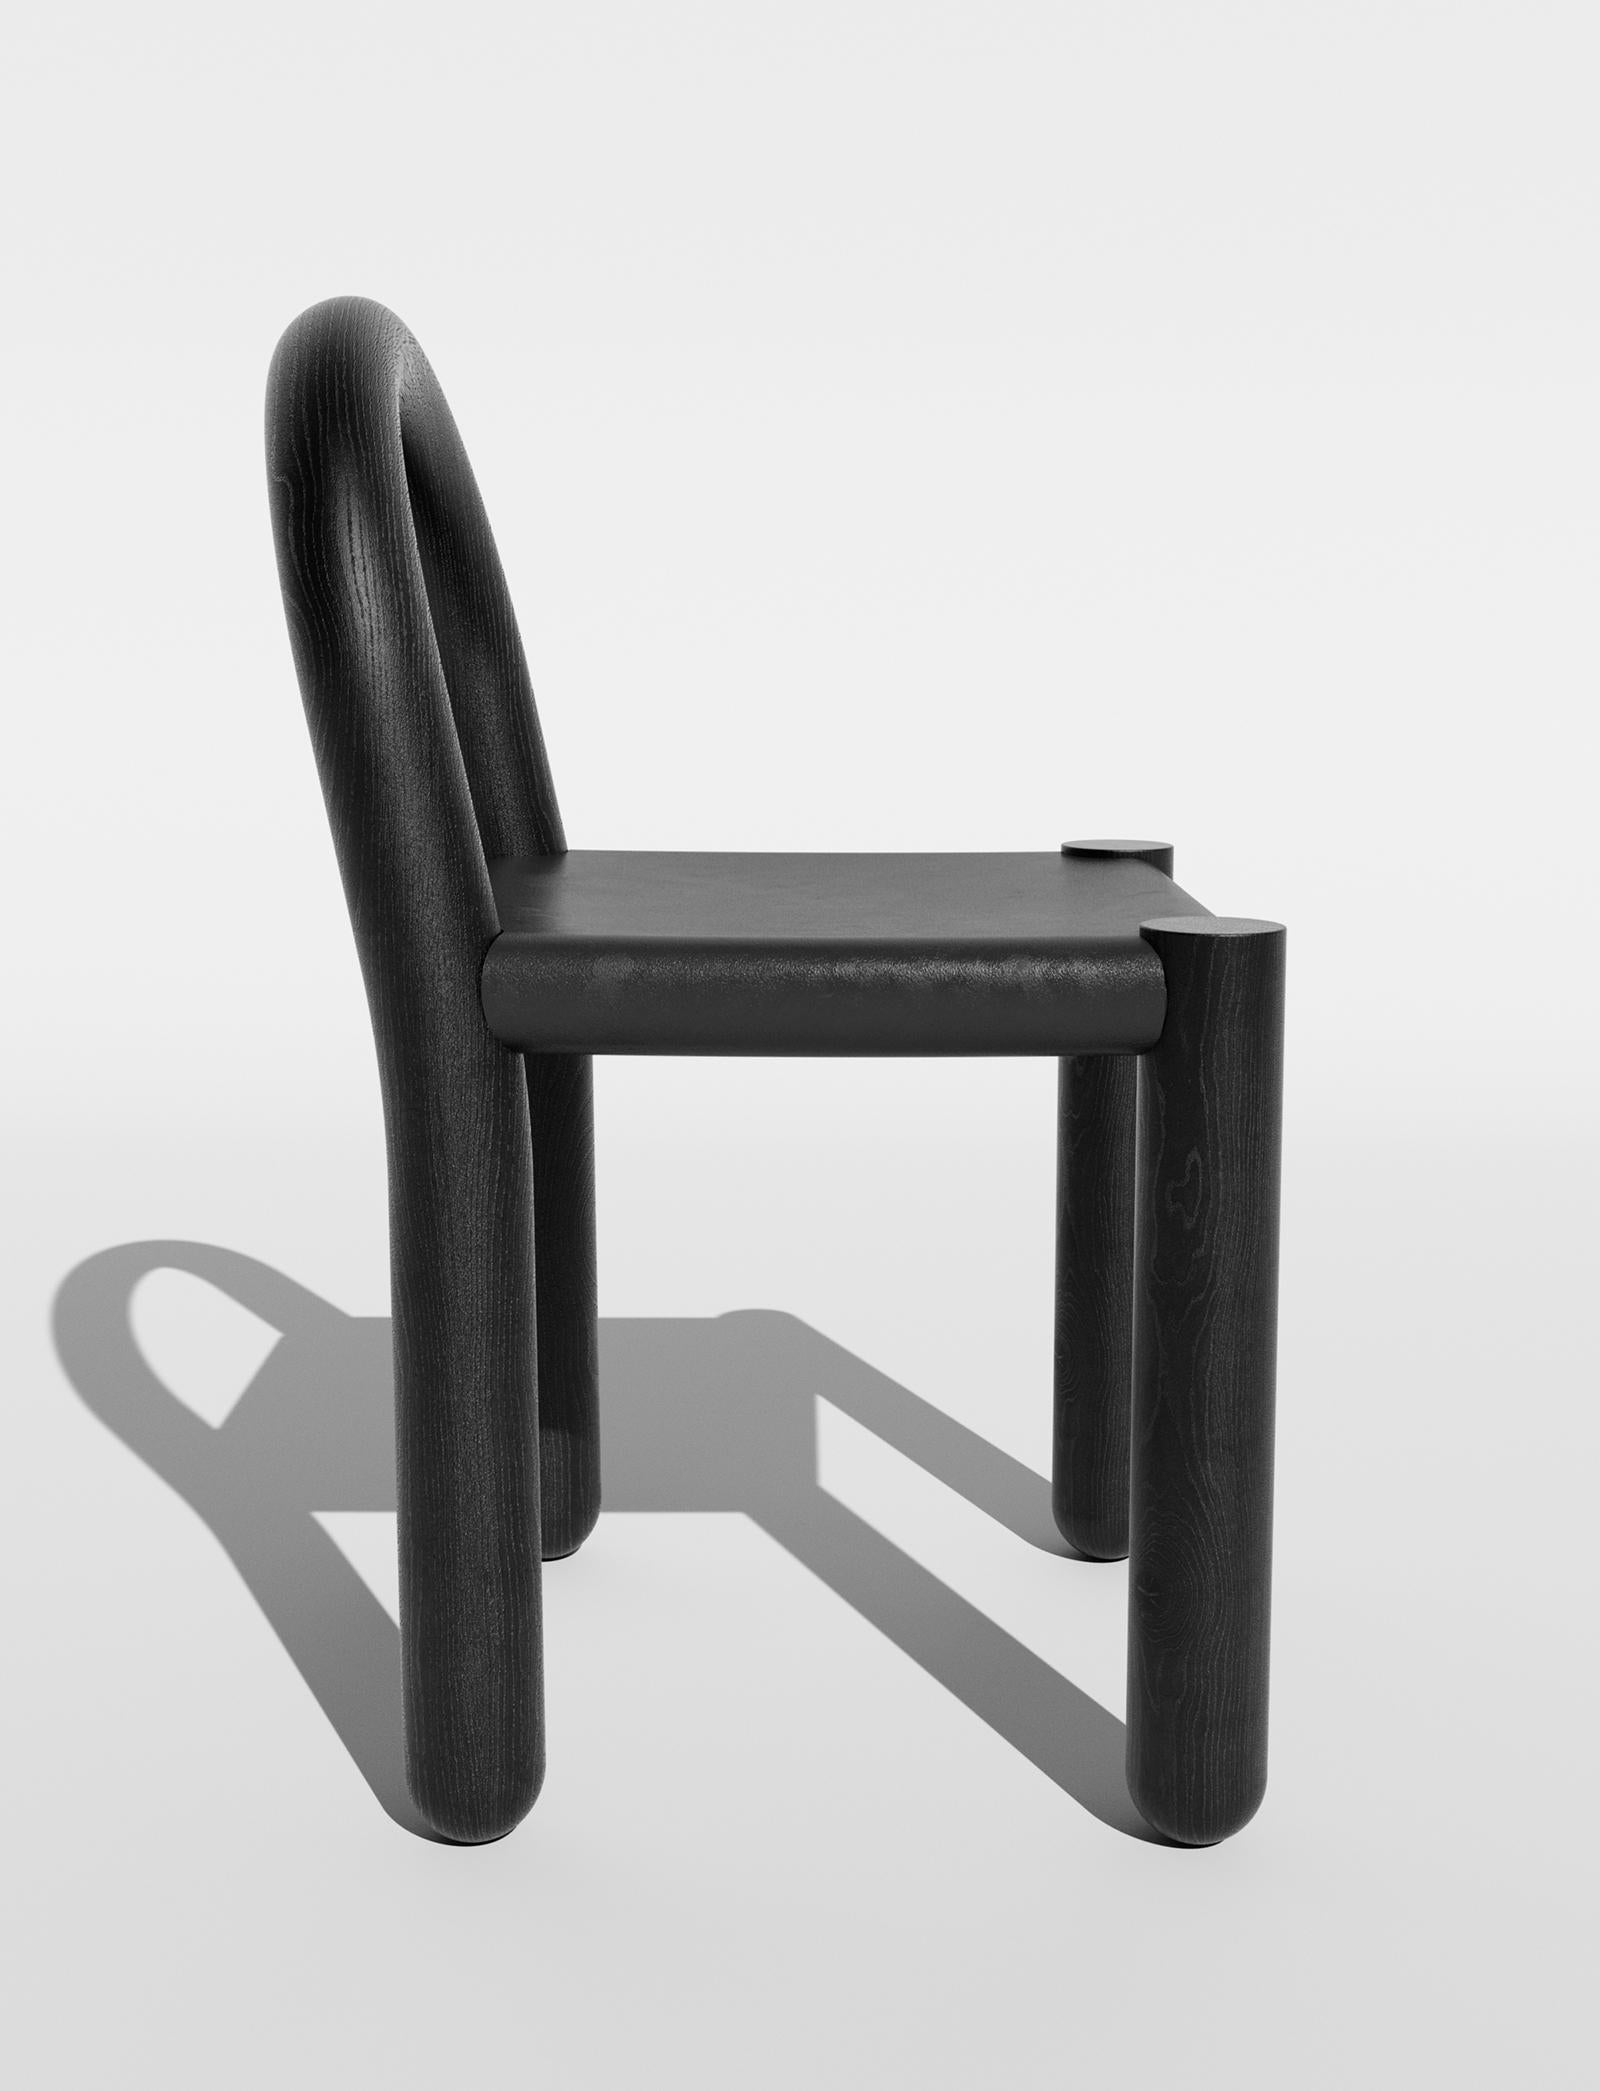 Brazilian Missa Chair in Leather and Wood by Pedro Paulo Venzon